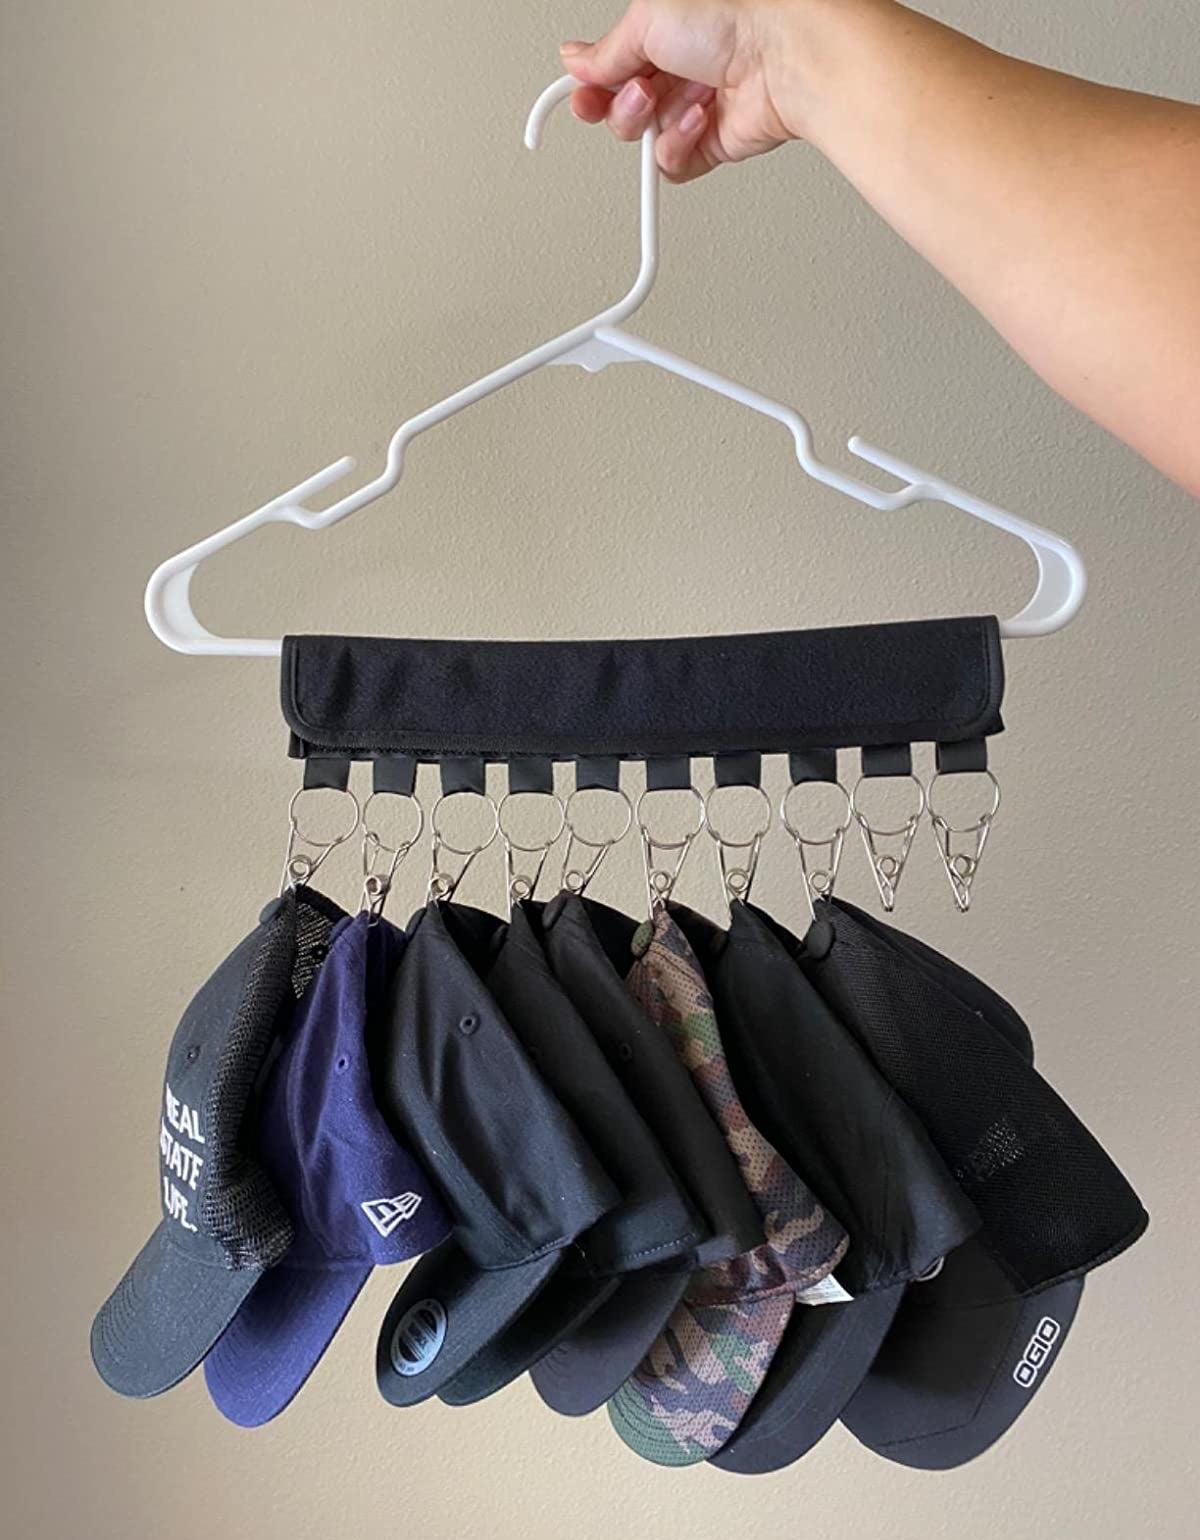 If Your Closet Is A Place Where Clothes Just Disappear, These 25 Products Will Help